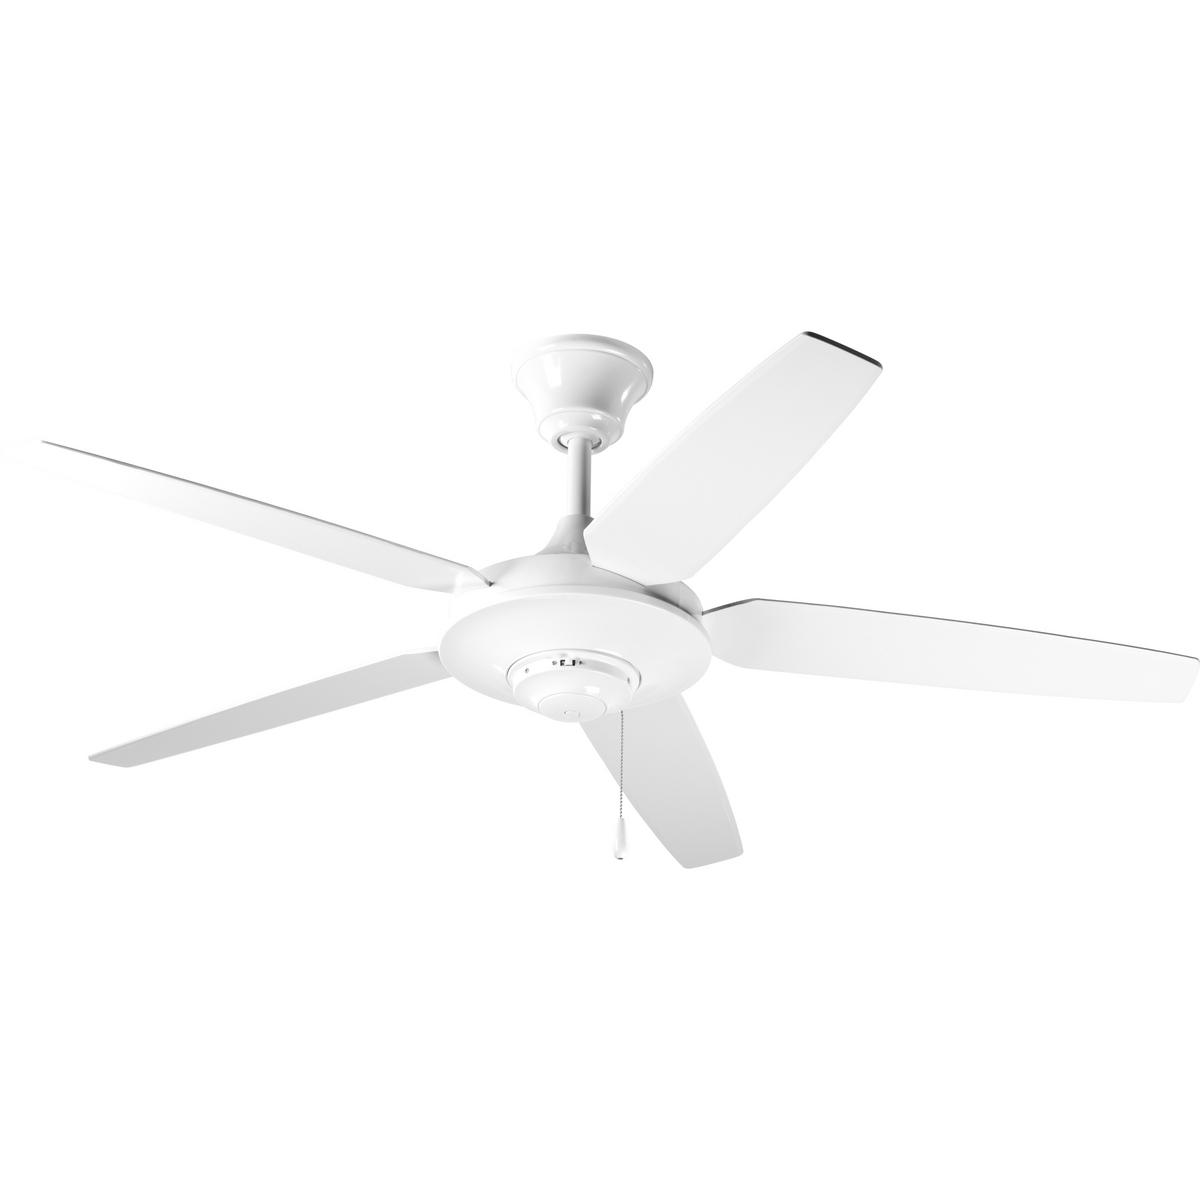 Hubbell P2530-30W 54" five-blade fan with White blades and a White finish. The AirPro Signature ceiling fan offers great performance and value. This contemporary styled fan features a powerful, 3-speed motor that can be reversed to provide year-round comfort. Includes inno